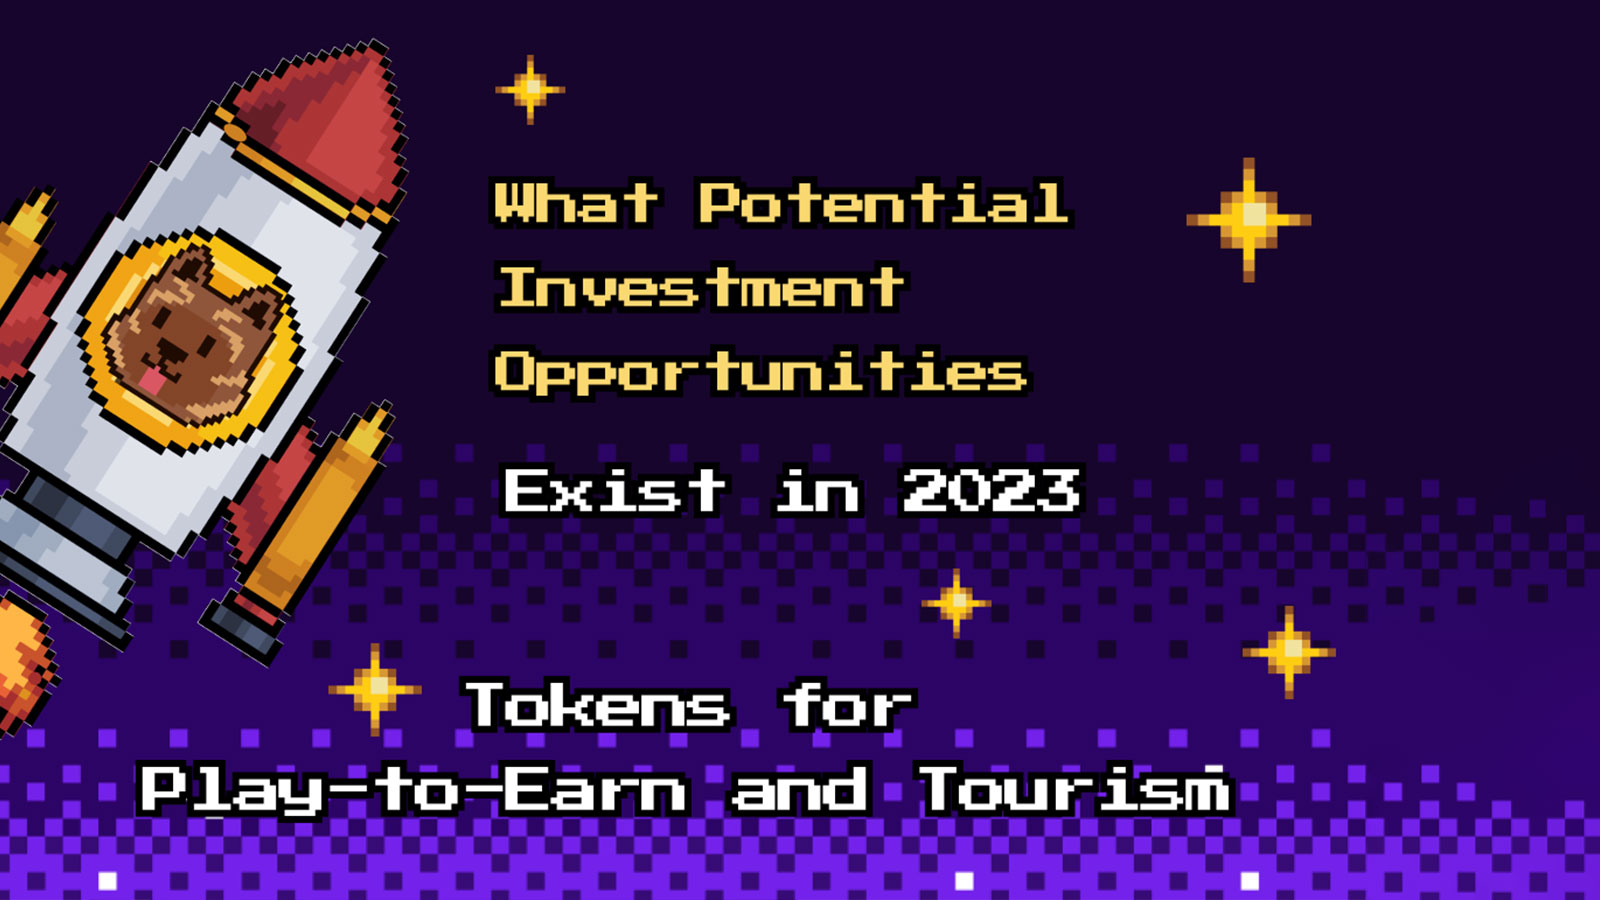 What Potential Investment Opportunities Exist in 2023? Tokens for Play-to-Earn and Tourism